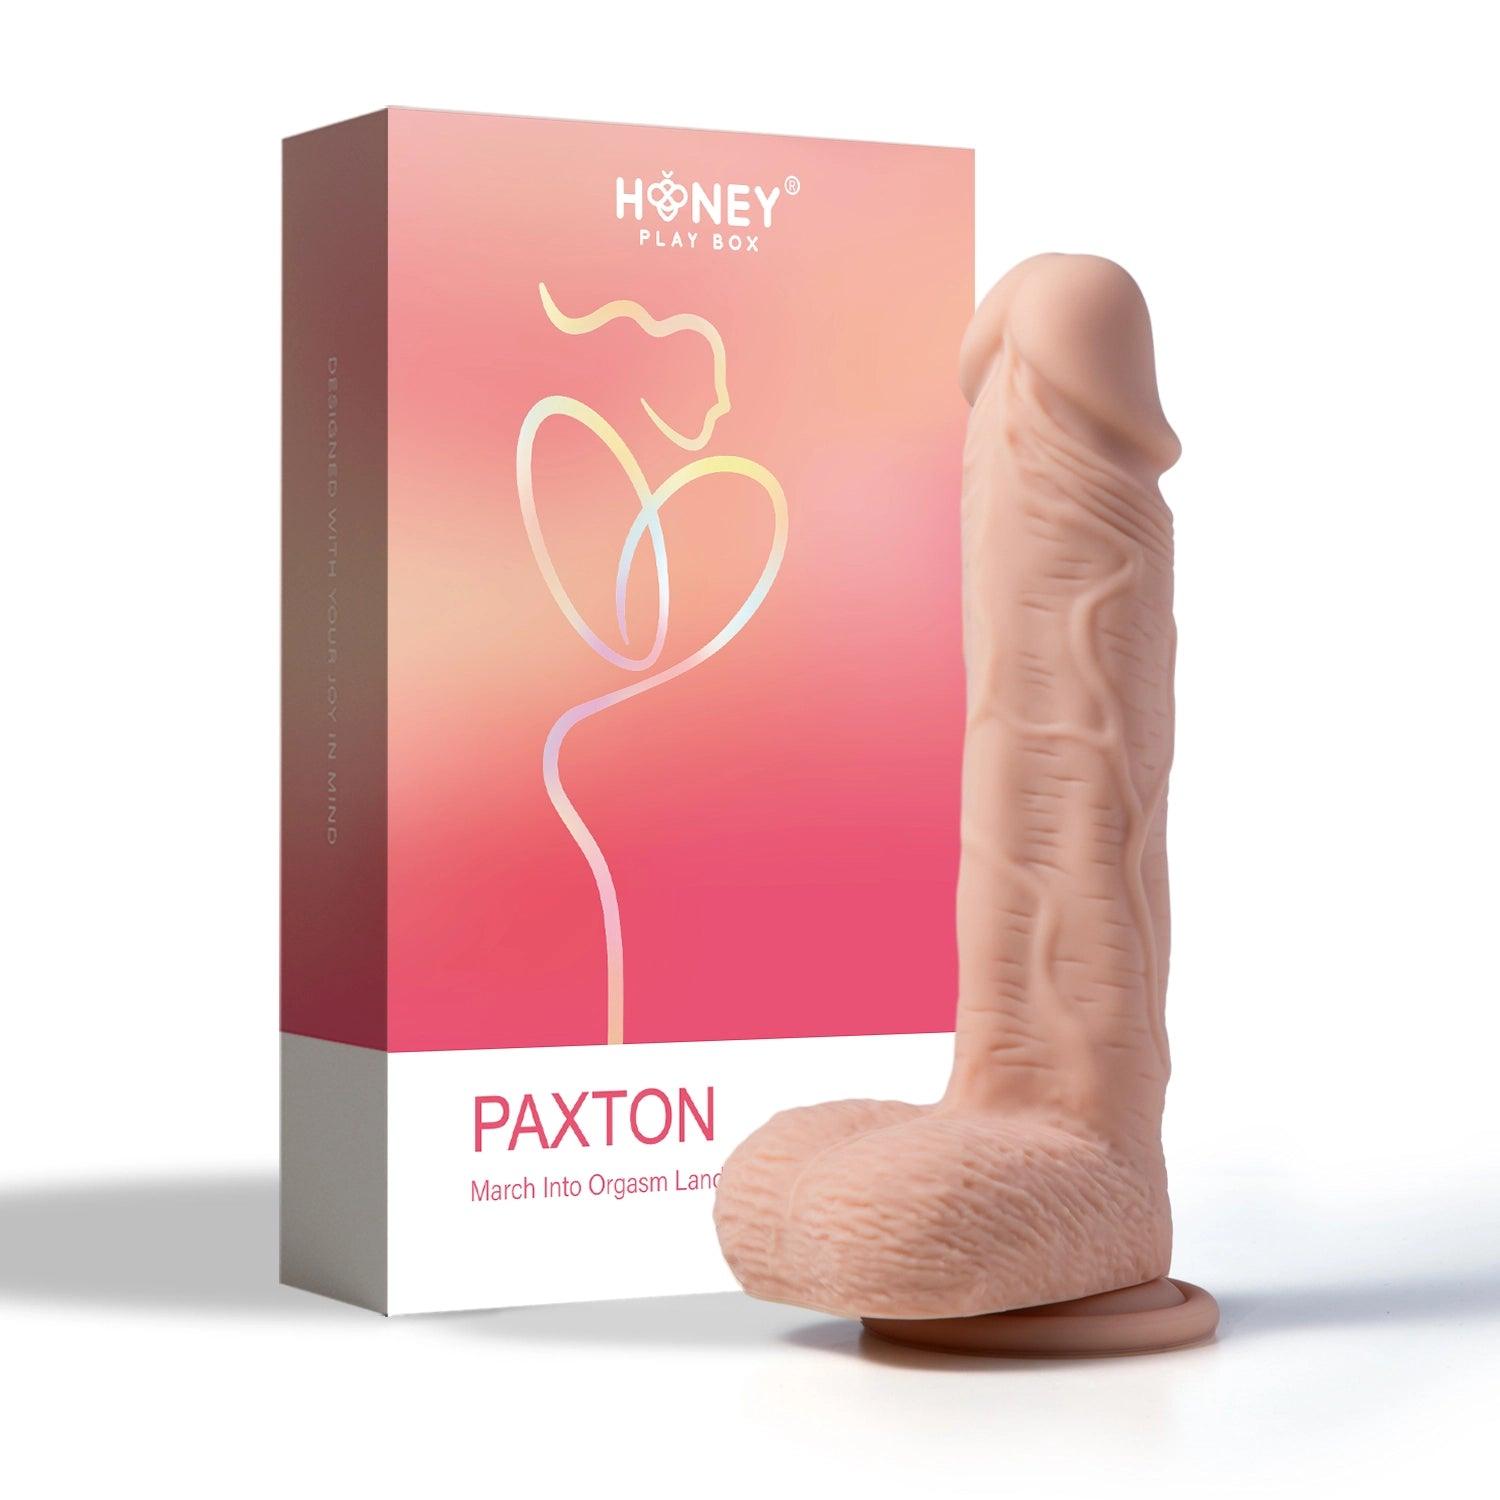 Paxton app controlled dildo